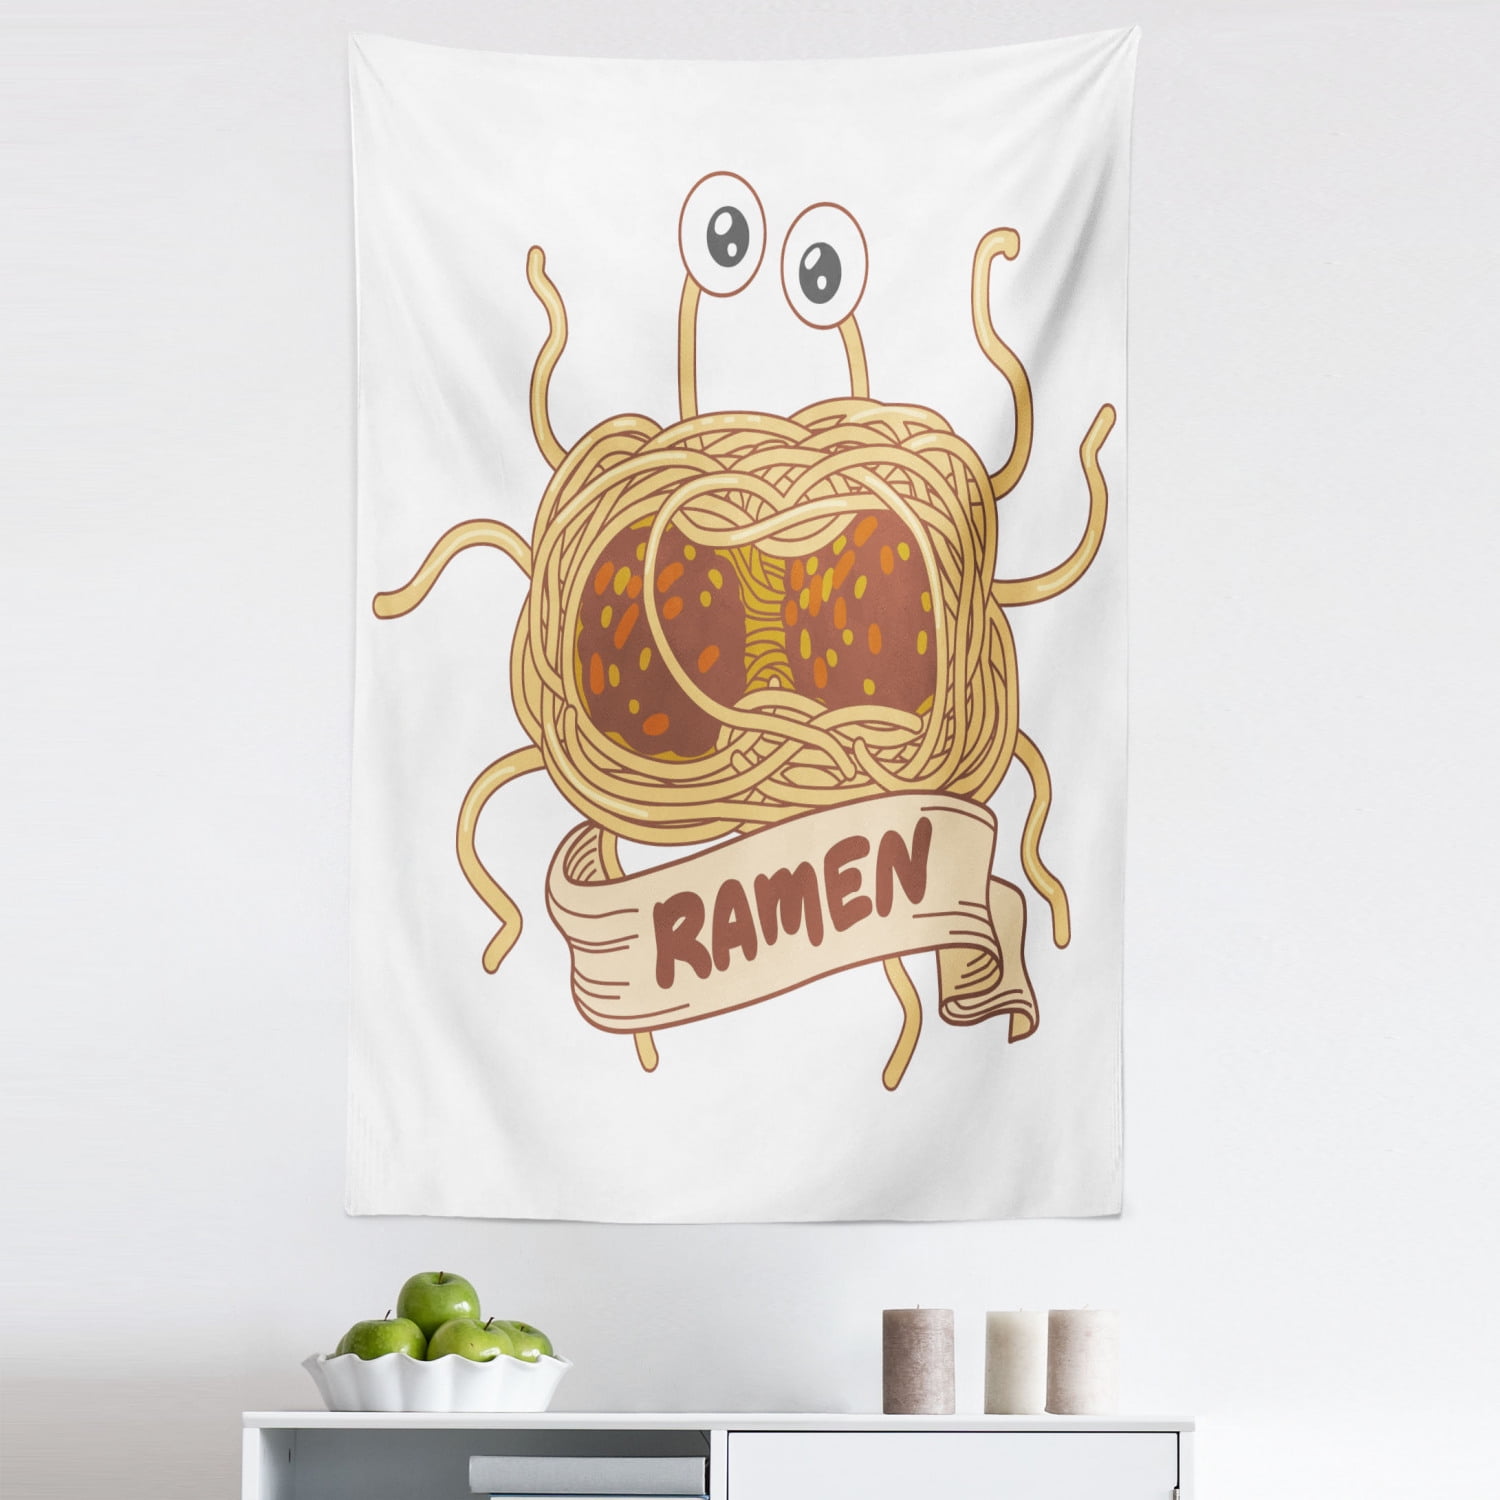 Hensigt Soldat Manga Humorous Tapestry, Cartoon Design Image of Flying Spaghetti Monster with  Ramen Written Ribbon, Fabric Wall Hanging Decor for Bedroom Living Room  Dorm, 5 Sizes, Multicolor, by Ambesonne - Walmart.com